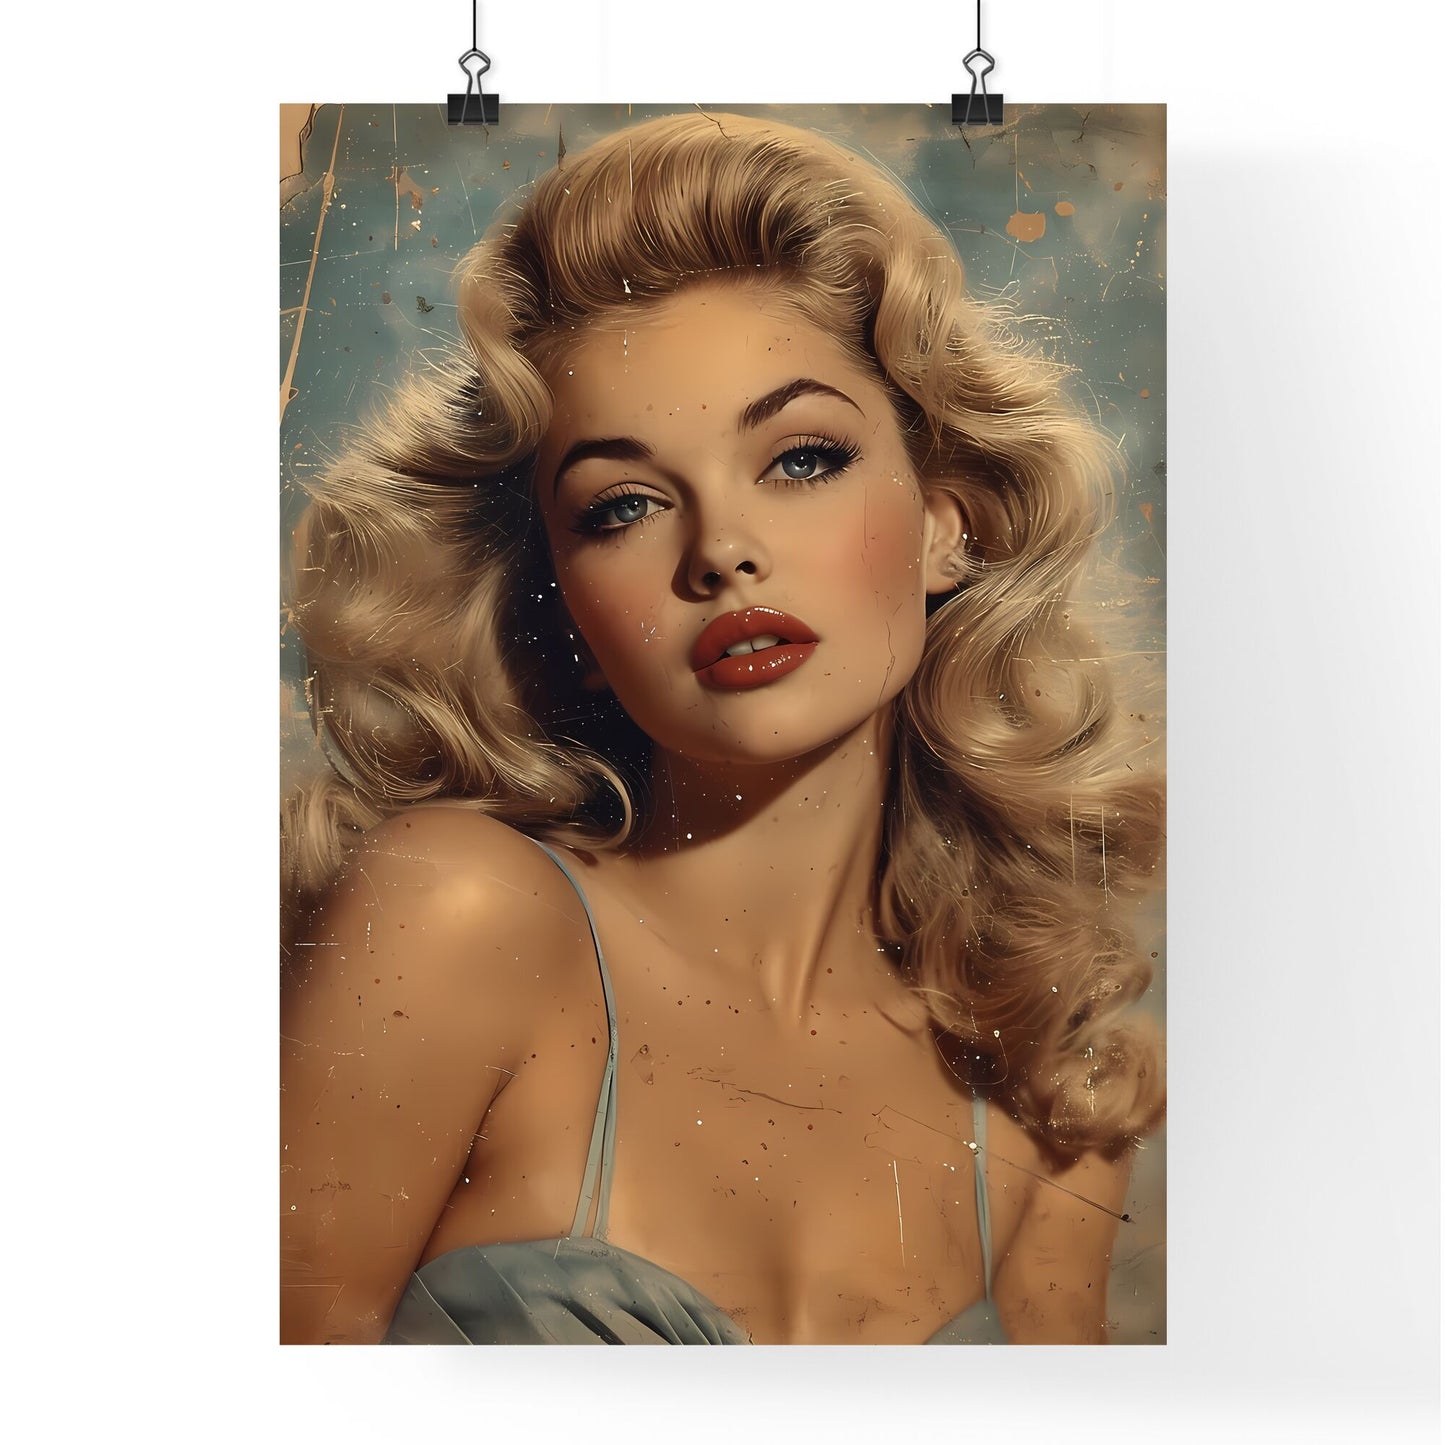 1959 pin up girl - Art print of a woman with blonde hair and red lipstick Default Title